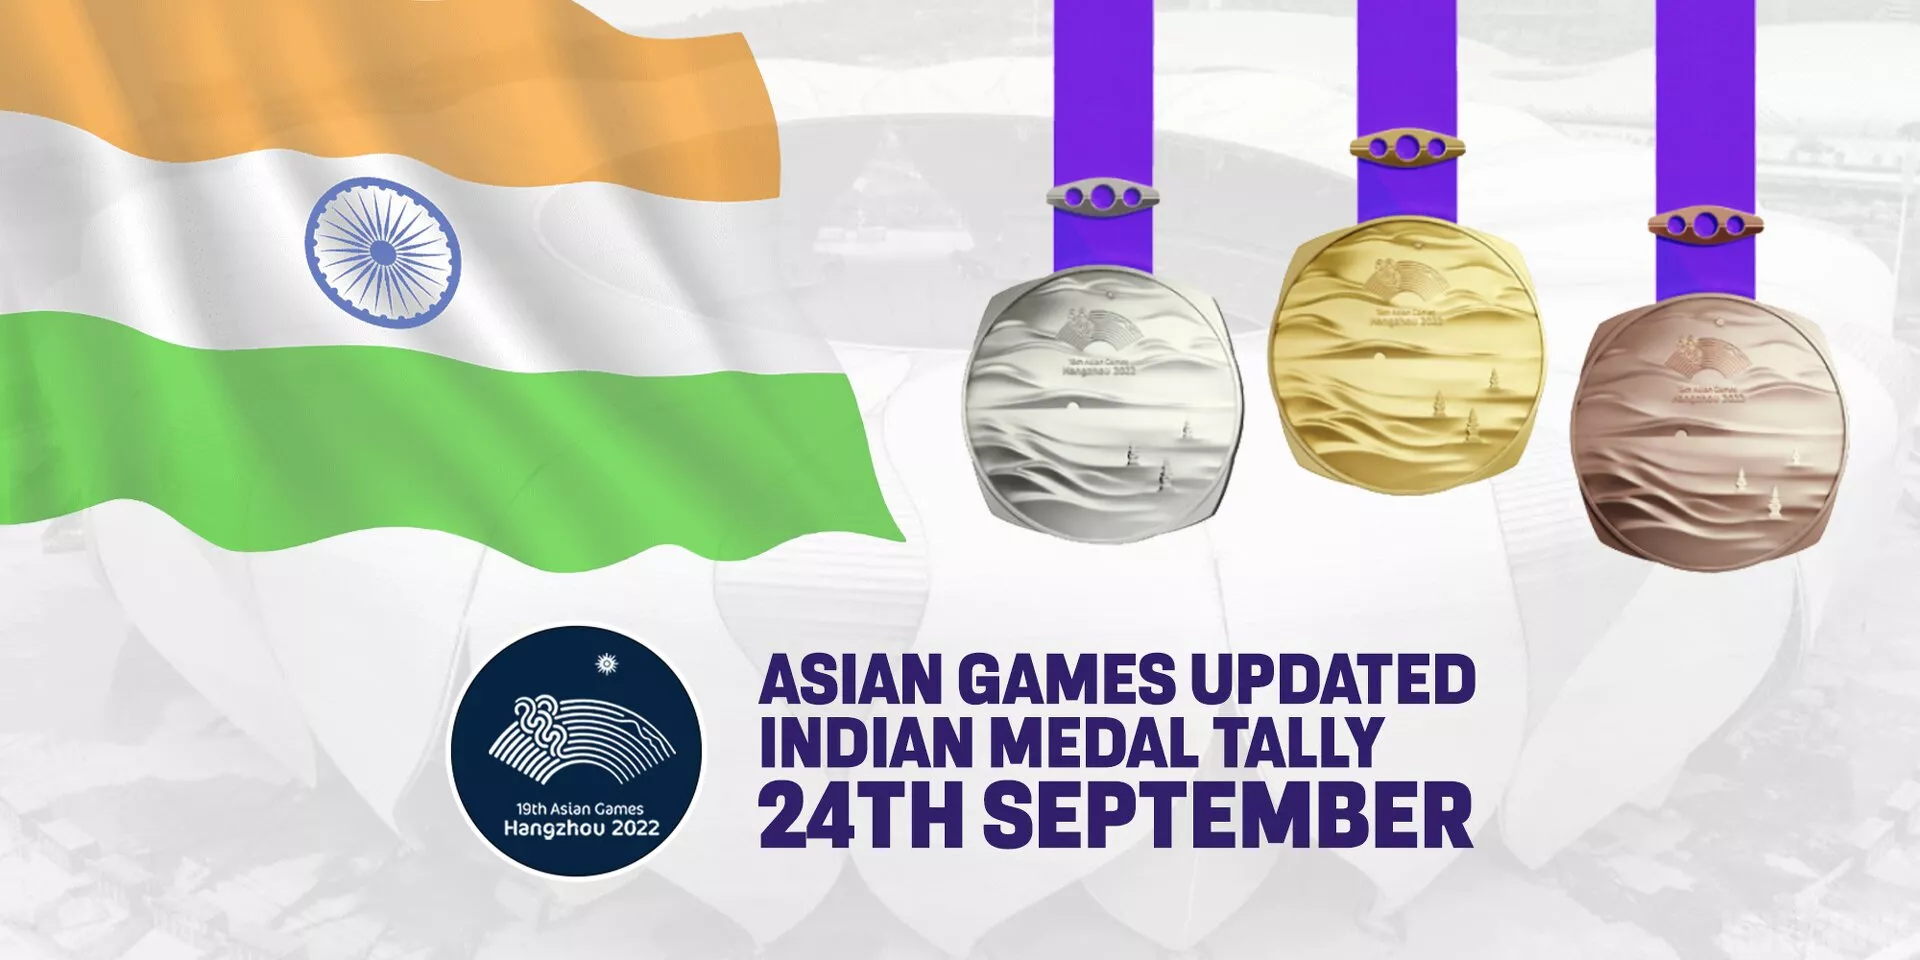 Asian Games 2023 India’s medal tally after Day 1, 24th September